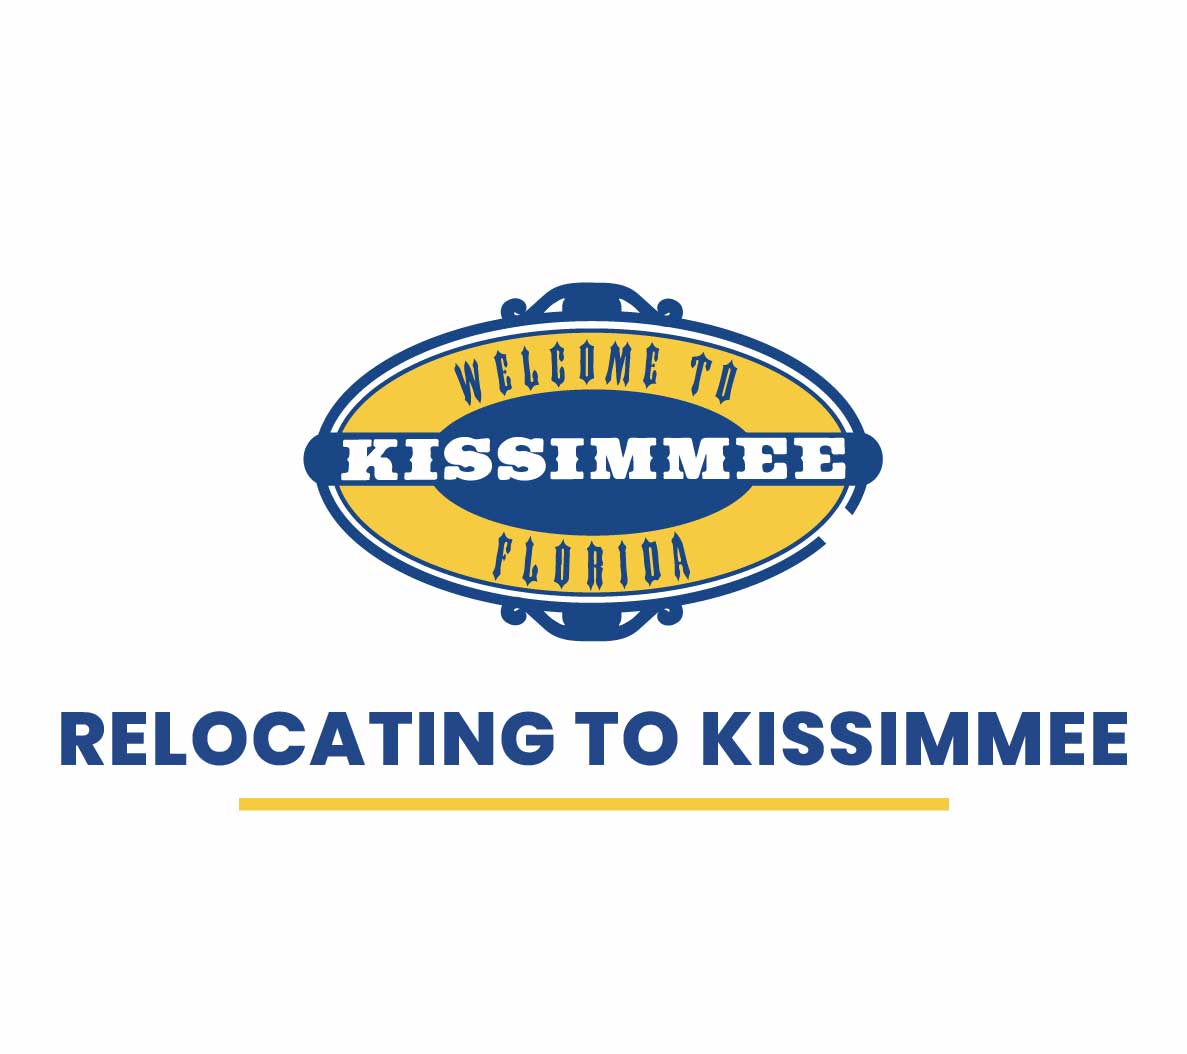 Click here to request relocating to Kissimmee